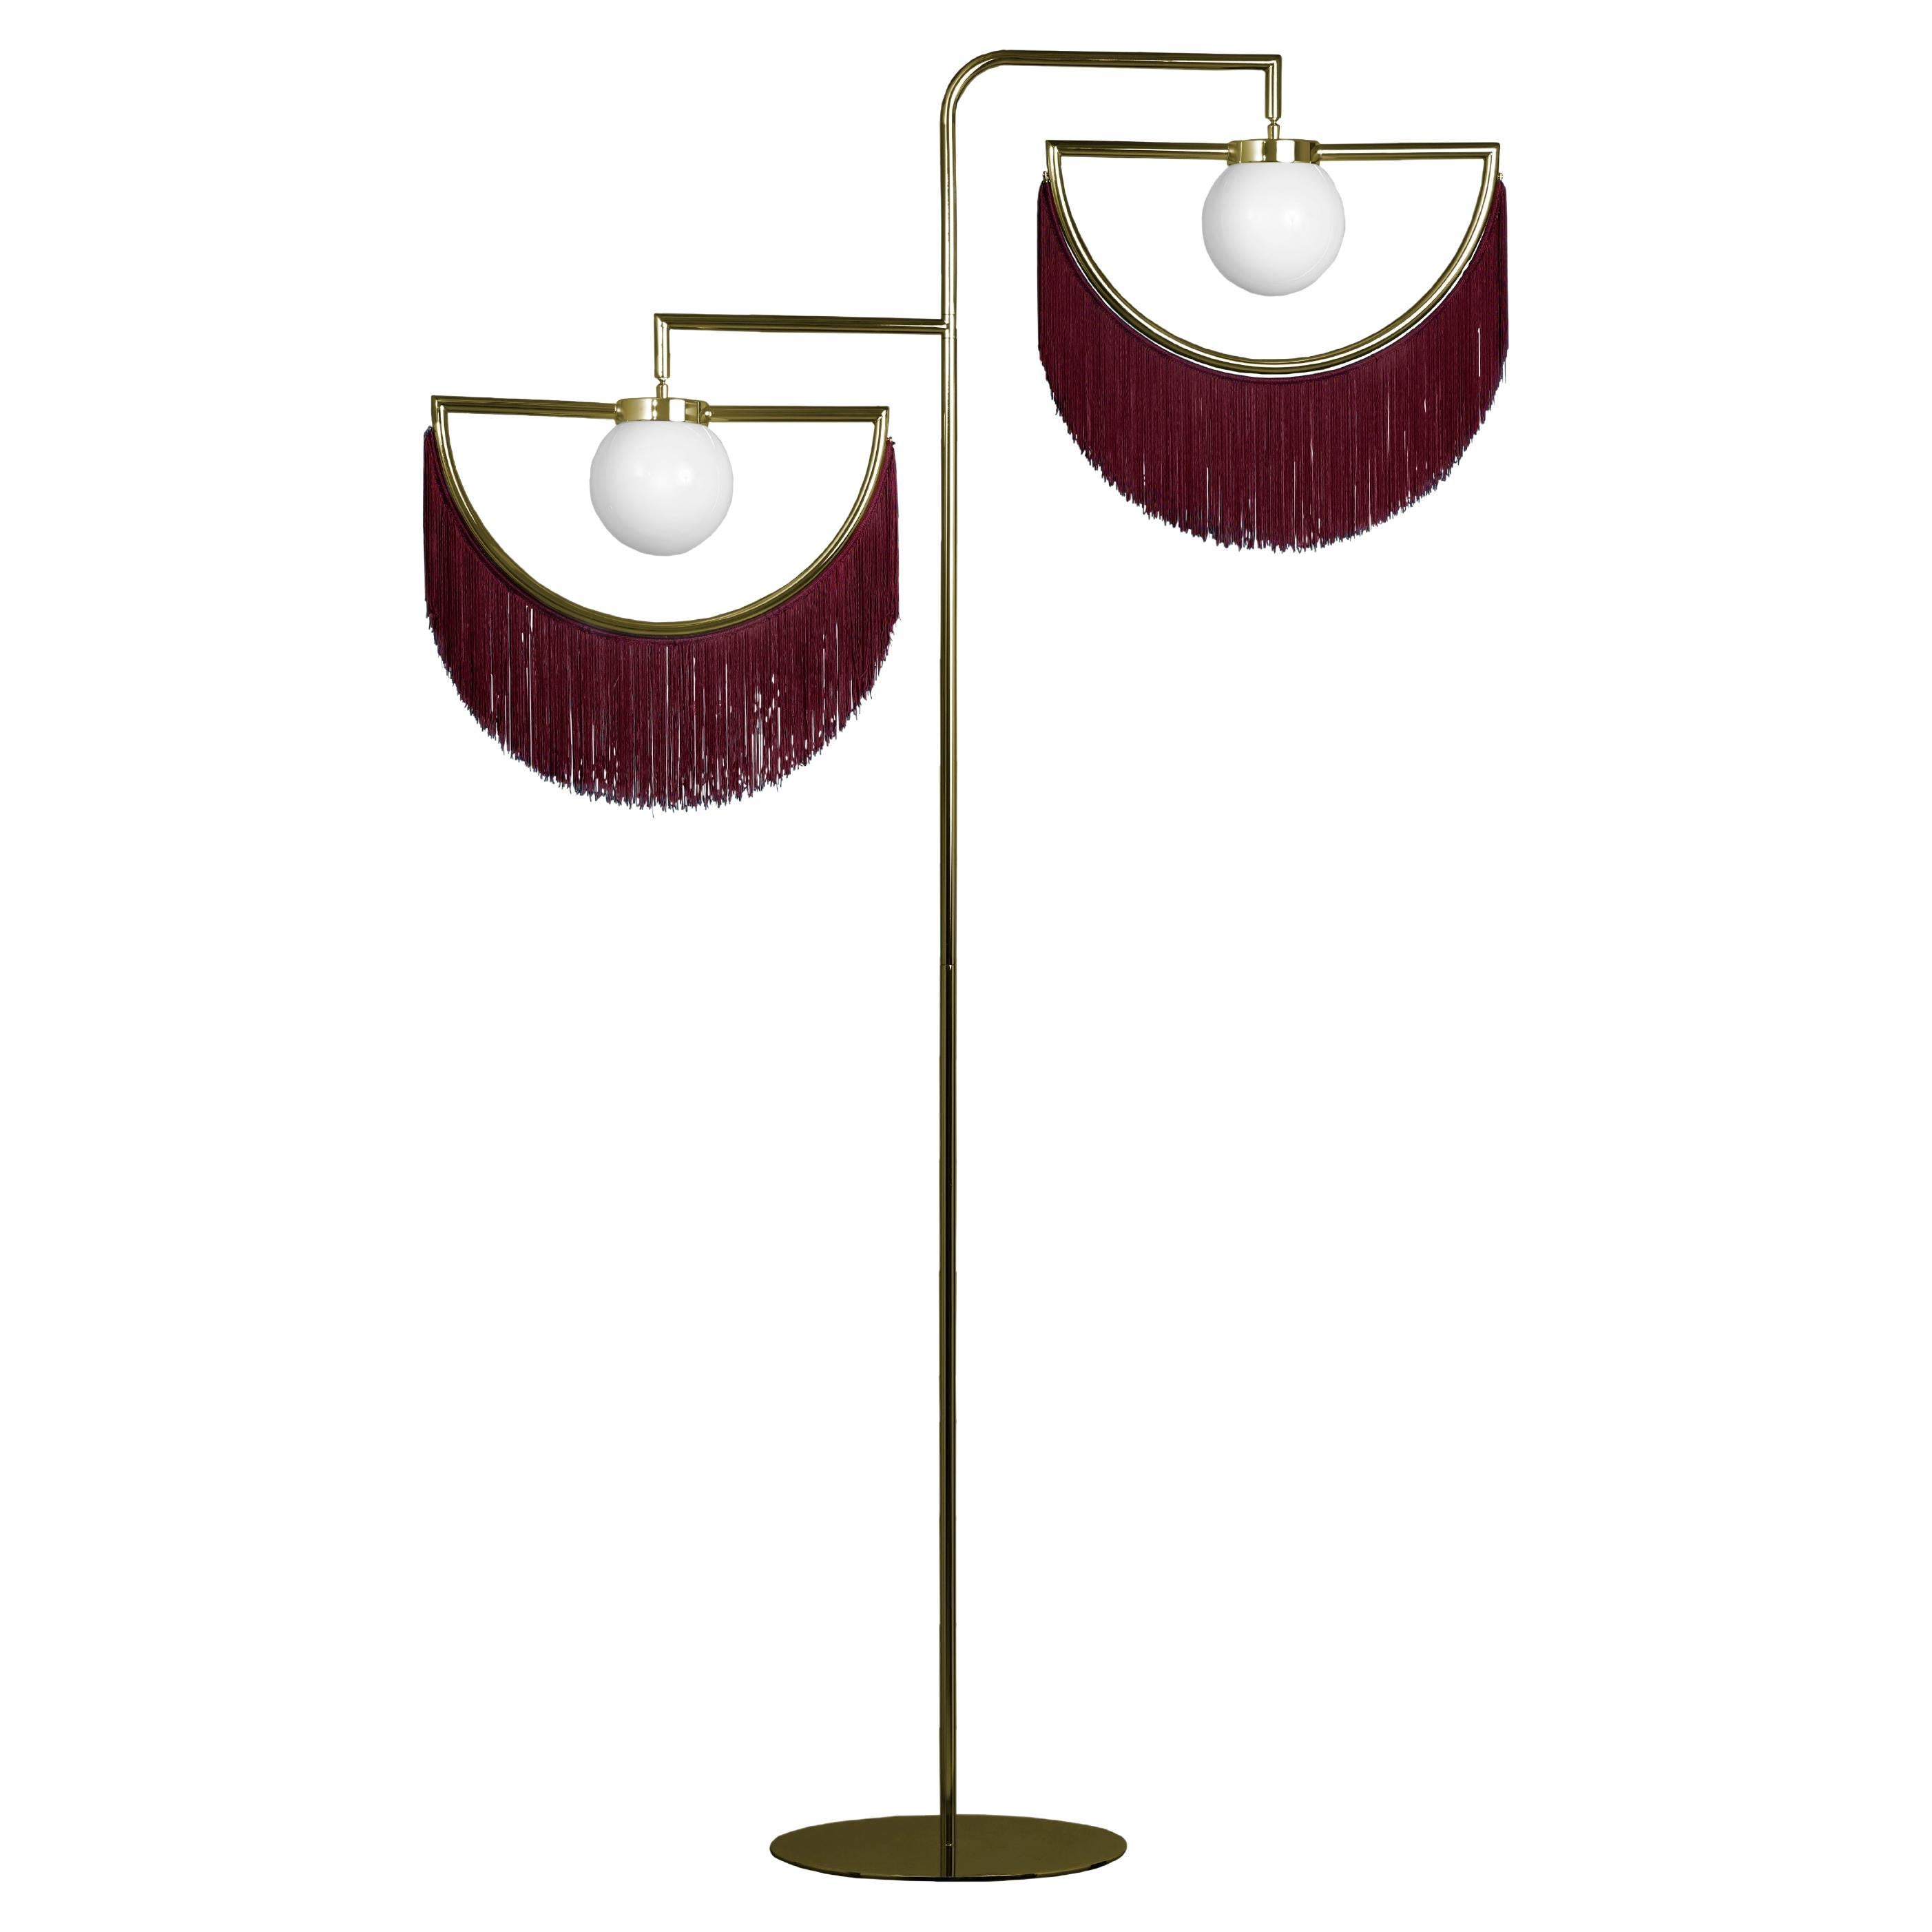 Wink Standing Lamp by Houtique, Bordeaux Red